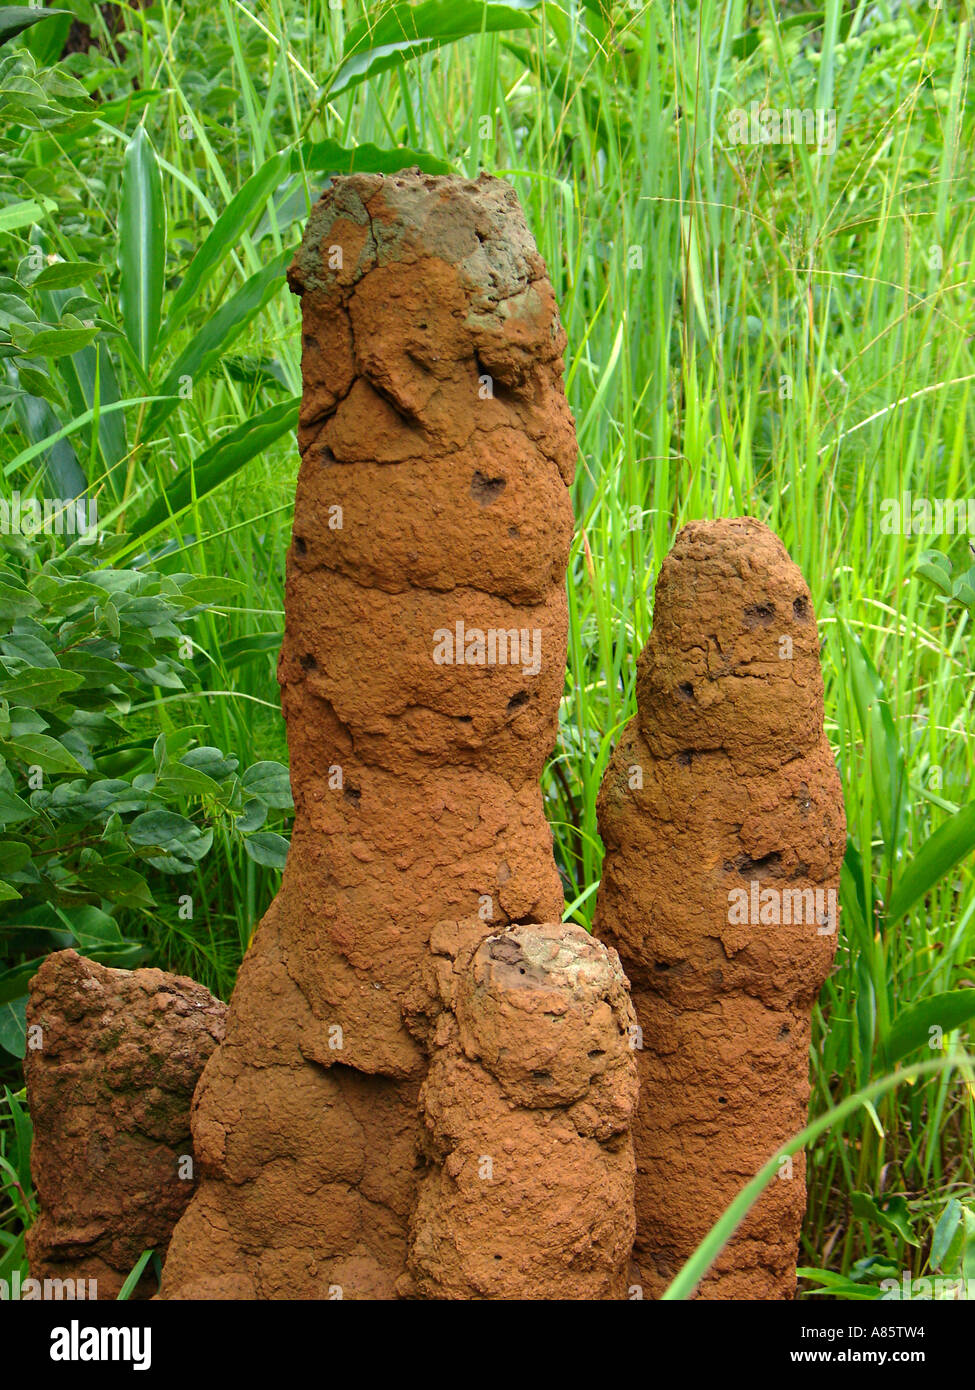 Close-up shot of African termite mounds with lush green vegetation in rural area of the Copperbelt province of Zambia, Southern Africa Stock Photo